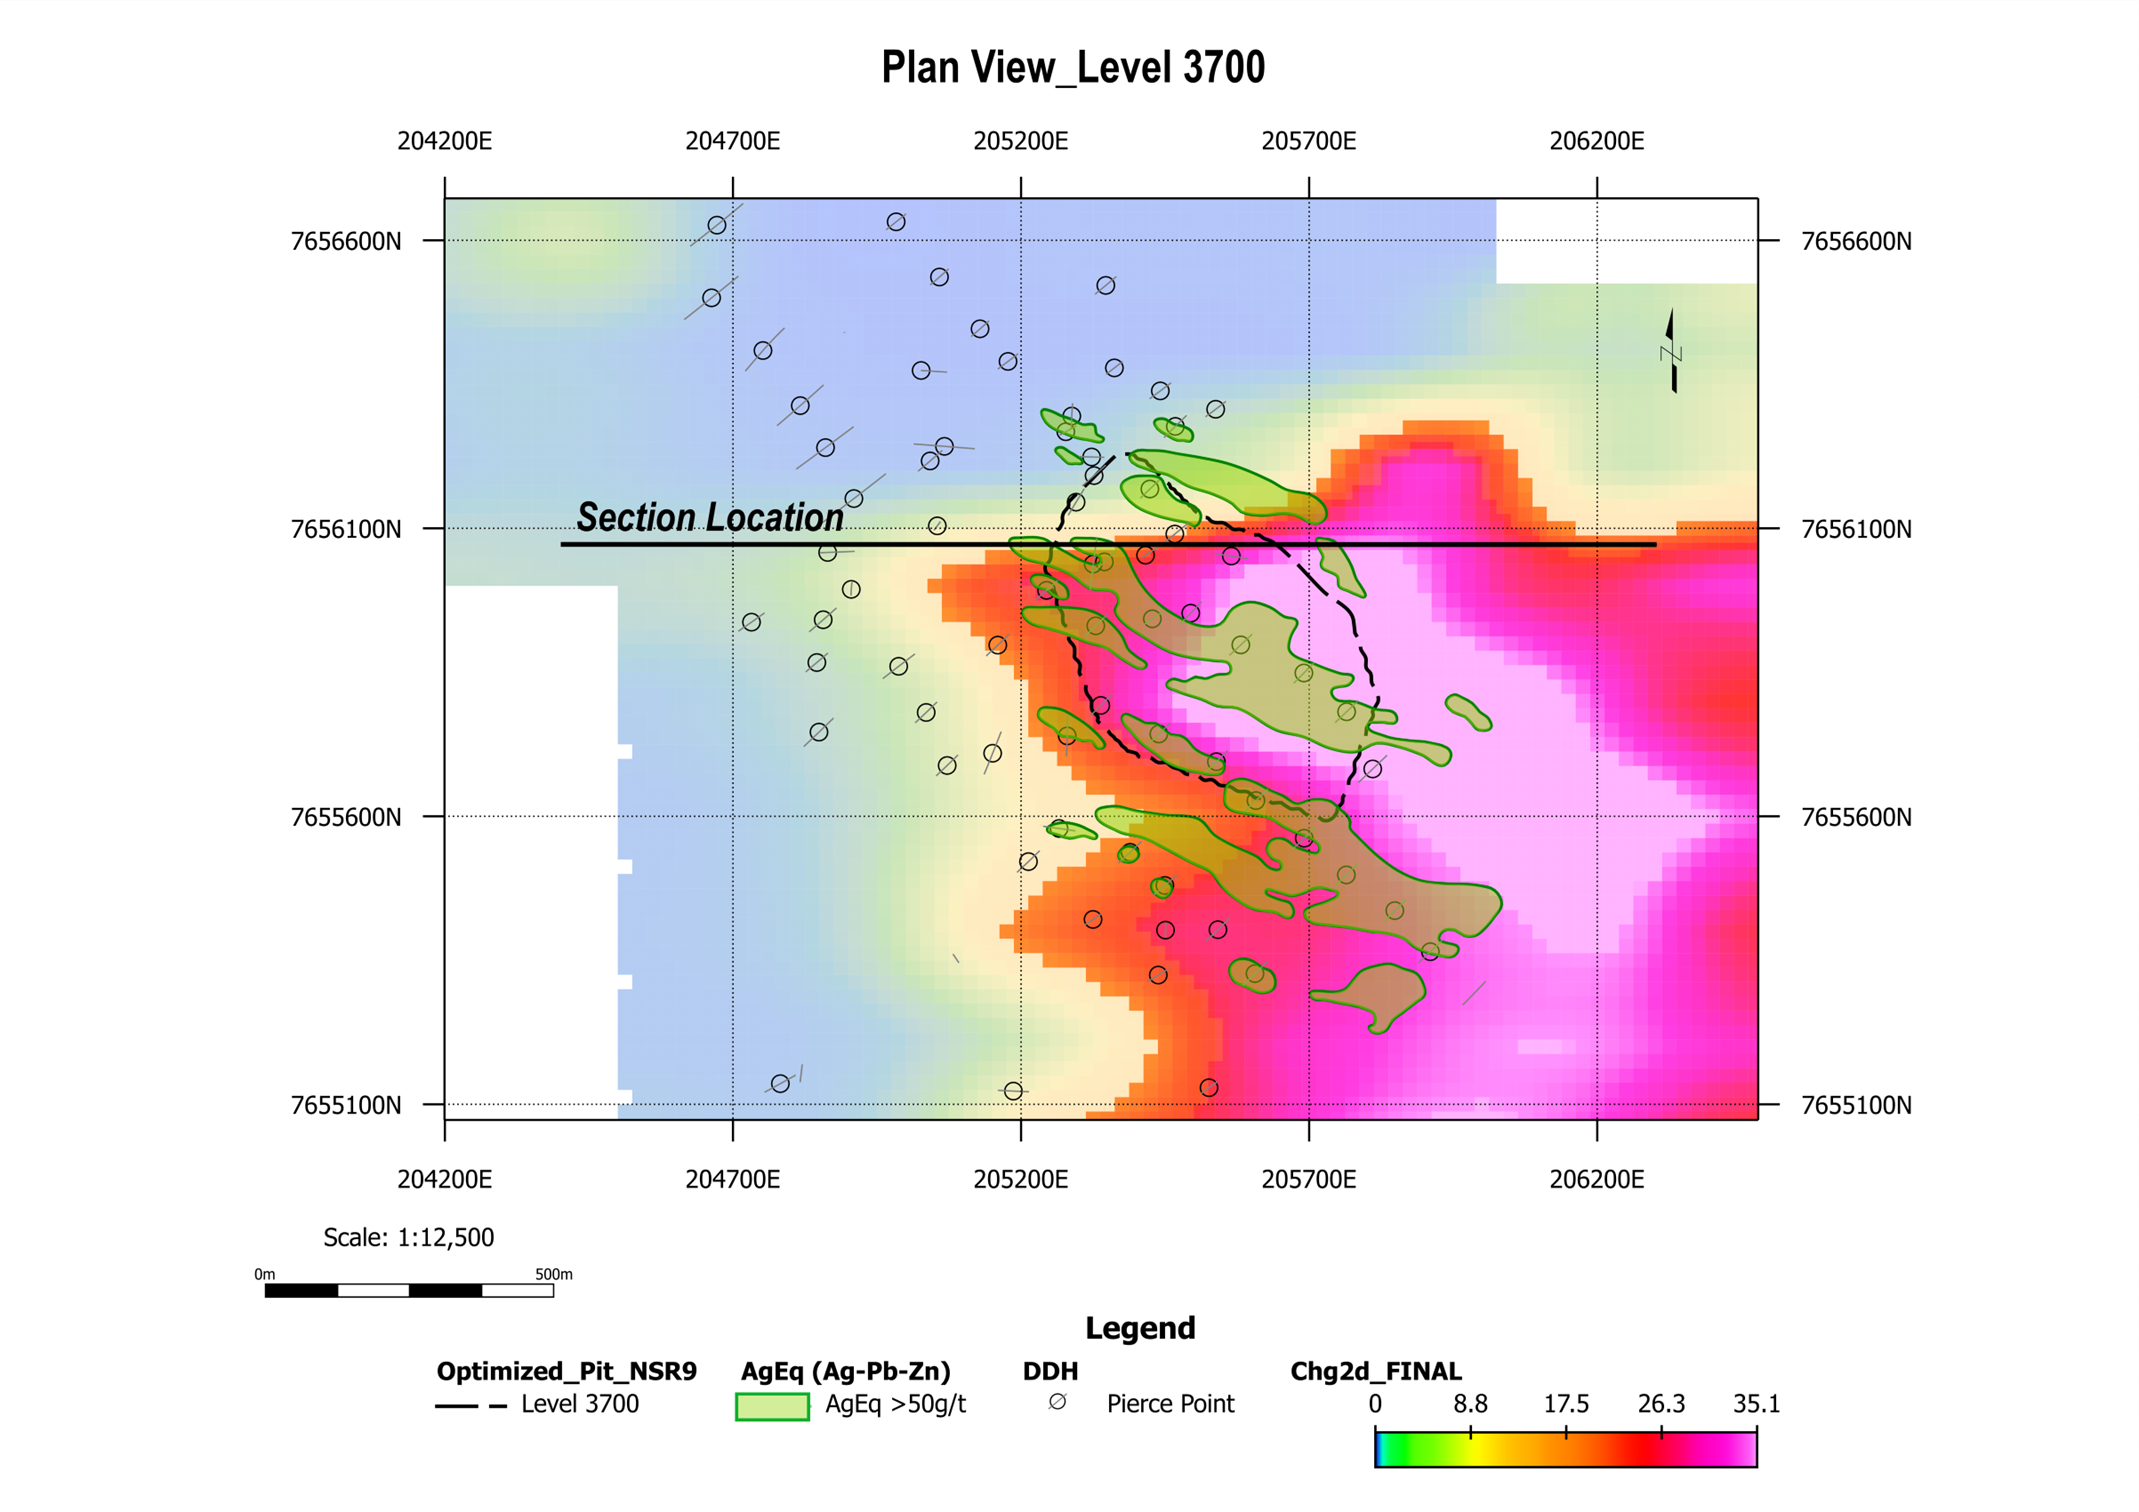 Figure 3 is a Plan Map of the same Chargeability Model at 3700m elevation shown in Figure 2 with the contoured 50 g Ag eq superimposed showing the strong correlation of high-grade areas with the chargeability anomaly.